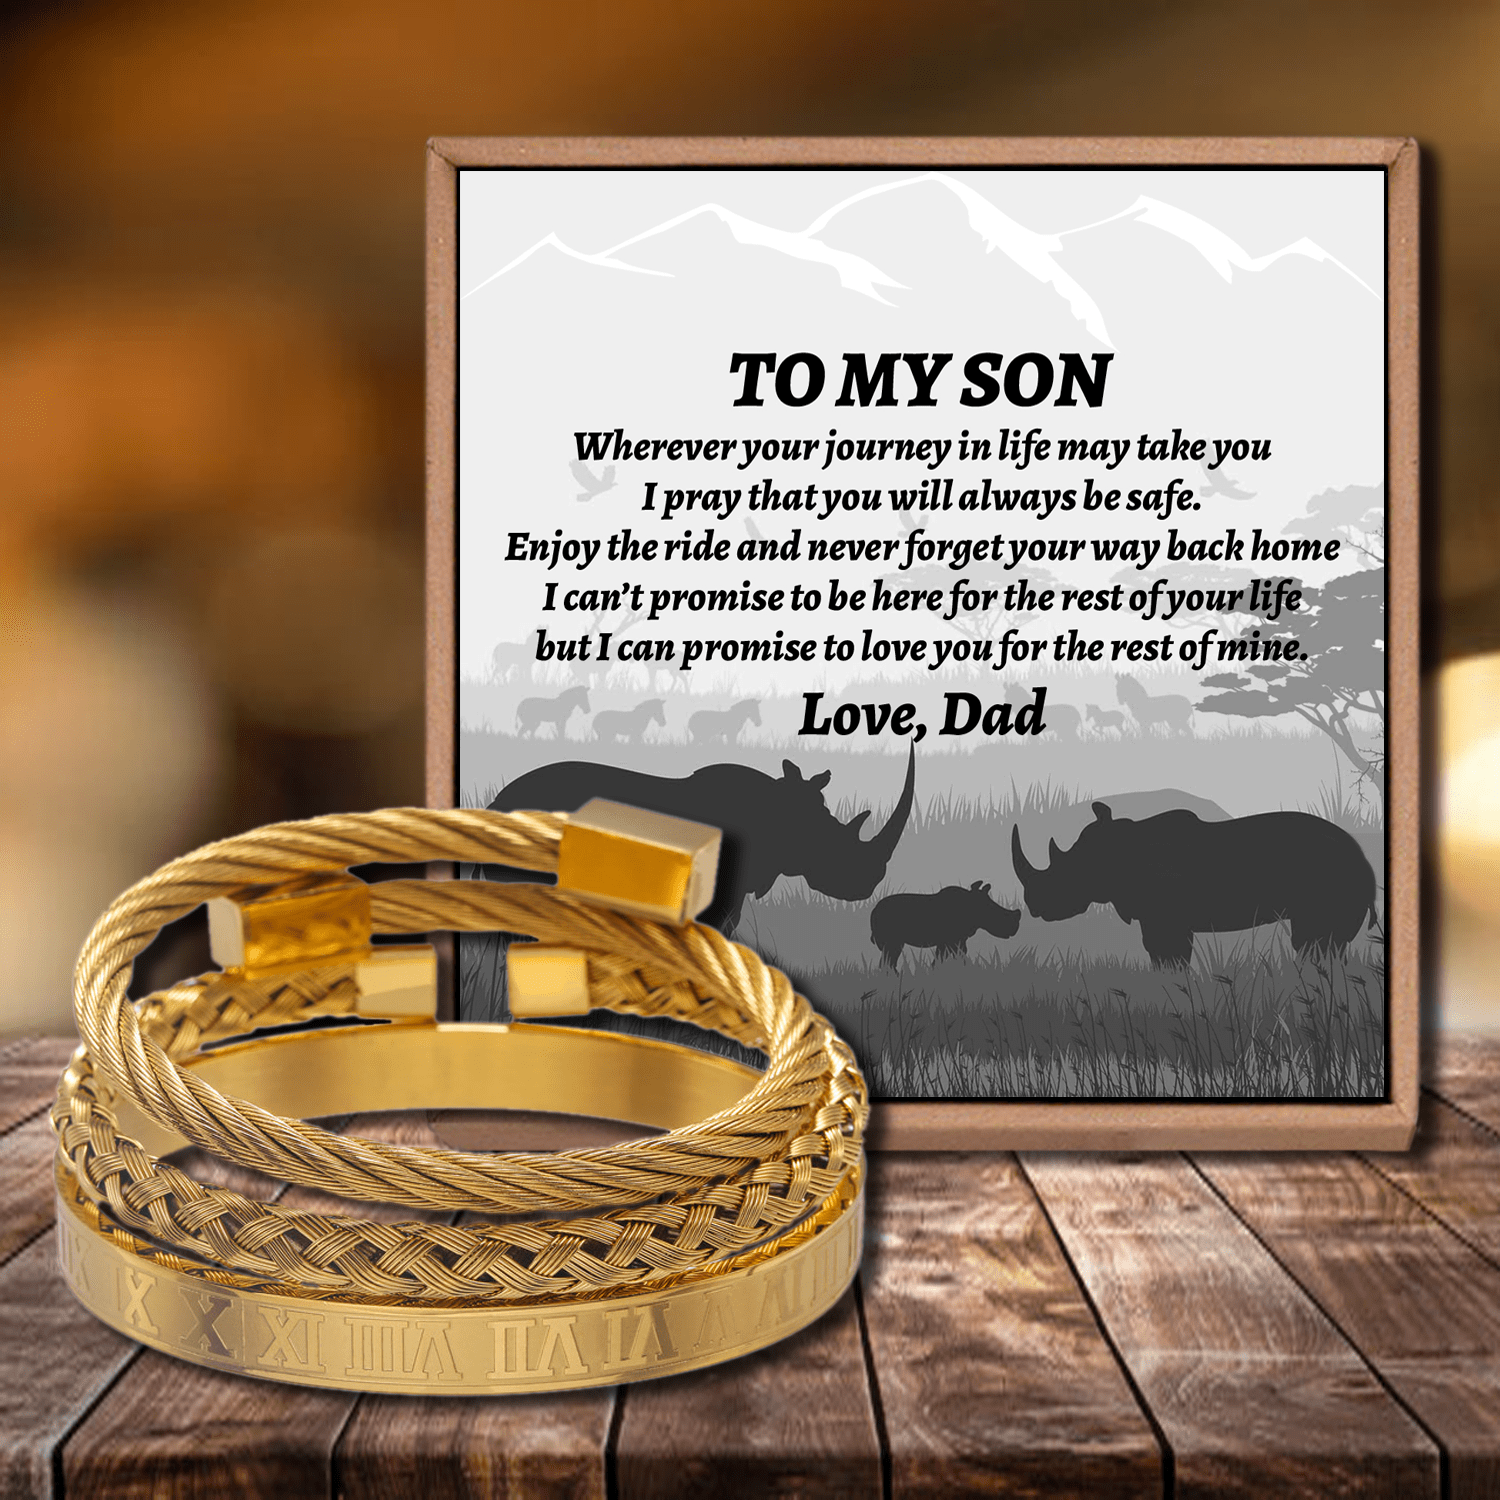 Bracelets Dad To Son - I Promise To Love You Roman Numeral Bangle Weave Bracelets Set Gold GiveMe-Gifts